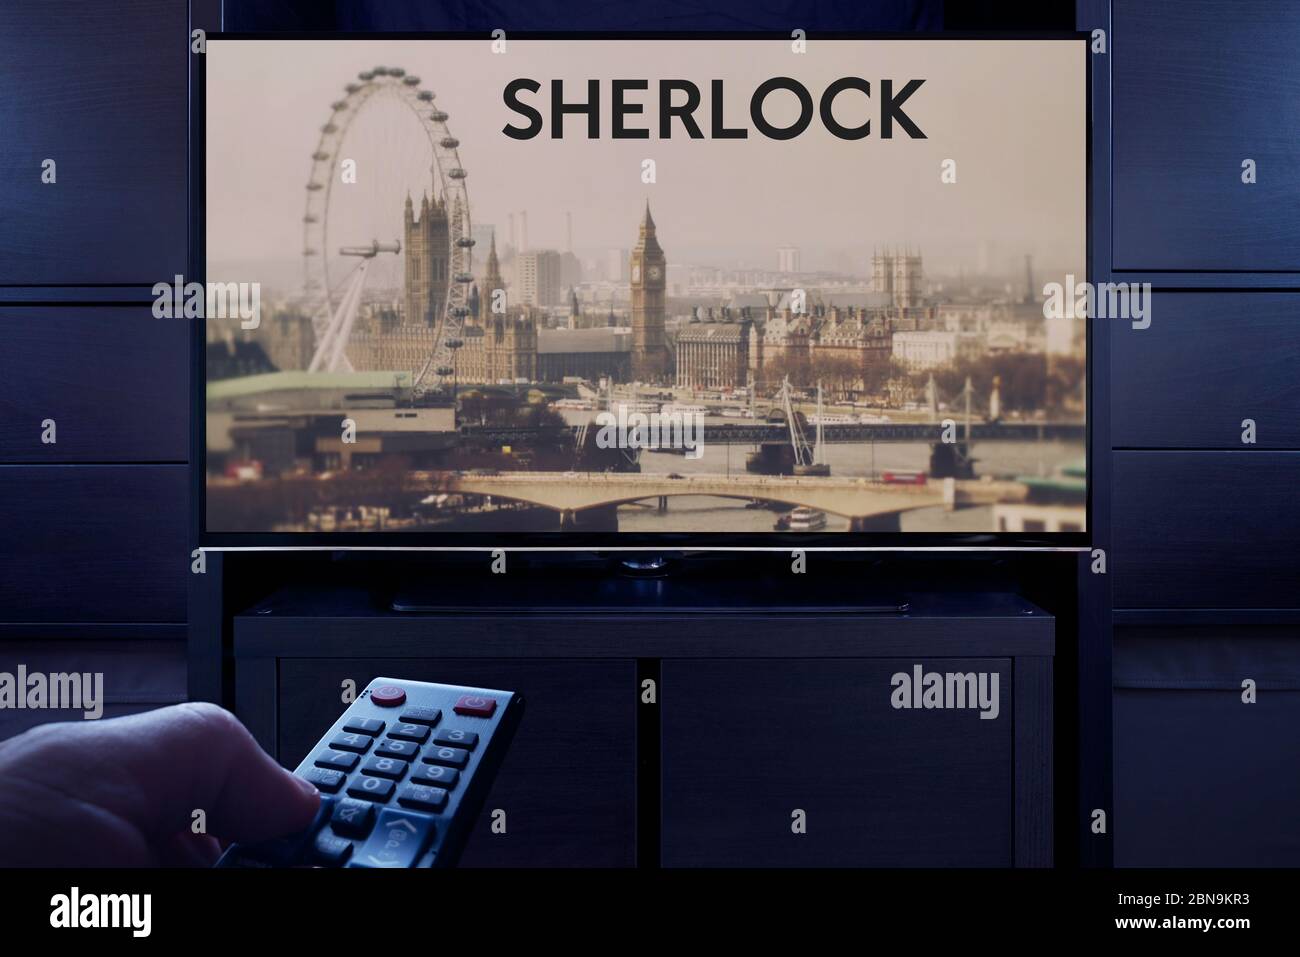 A man points a TV remote at the television which displays the Sherlock main title screen (Editorial use only). Stock Photo